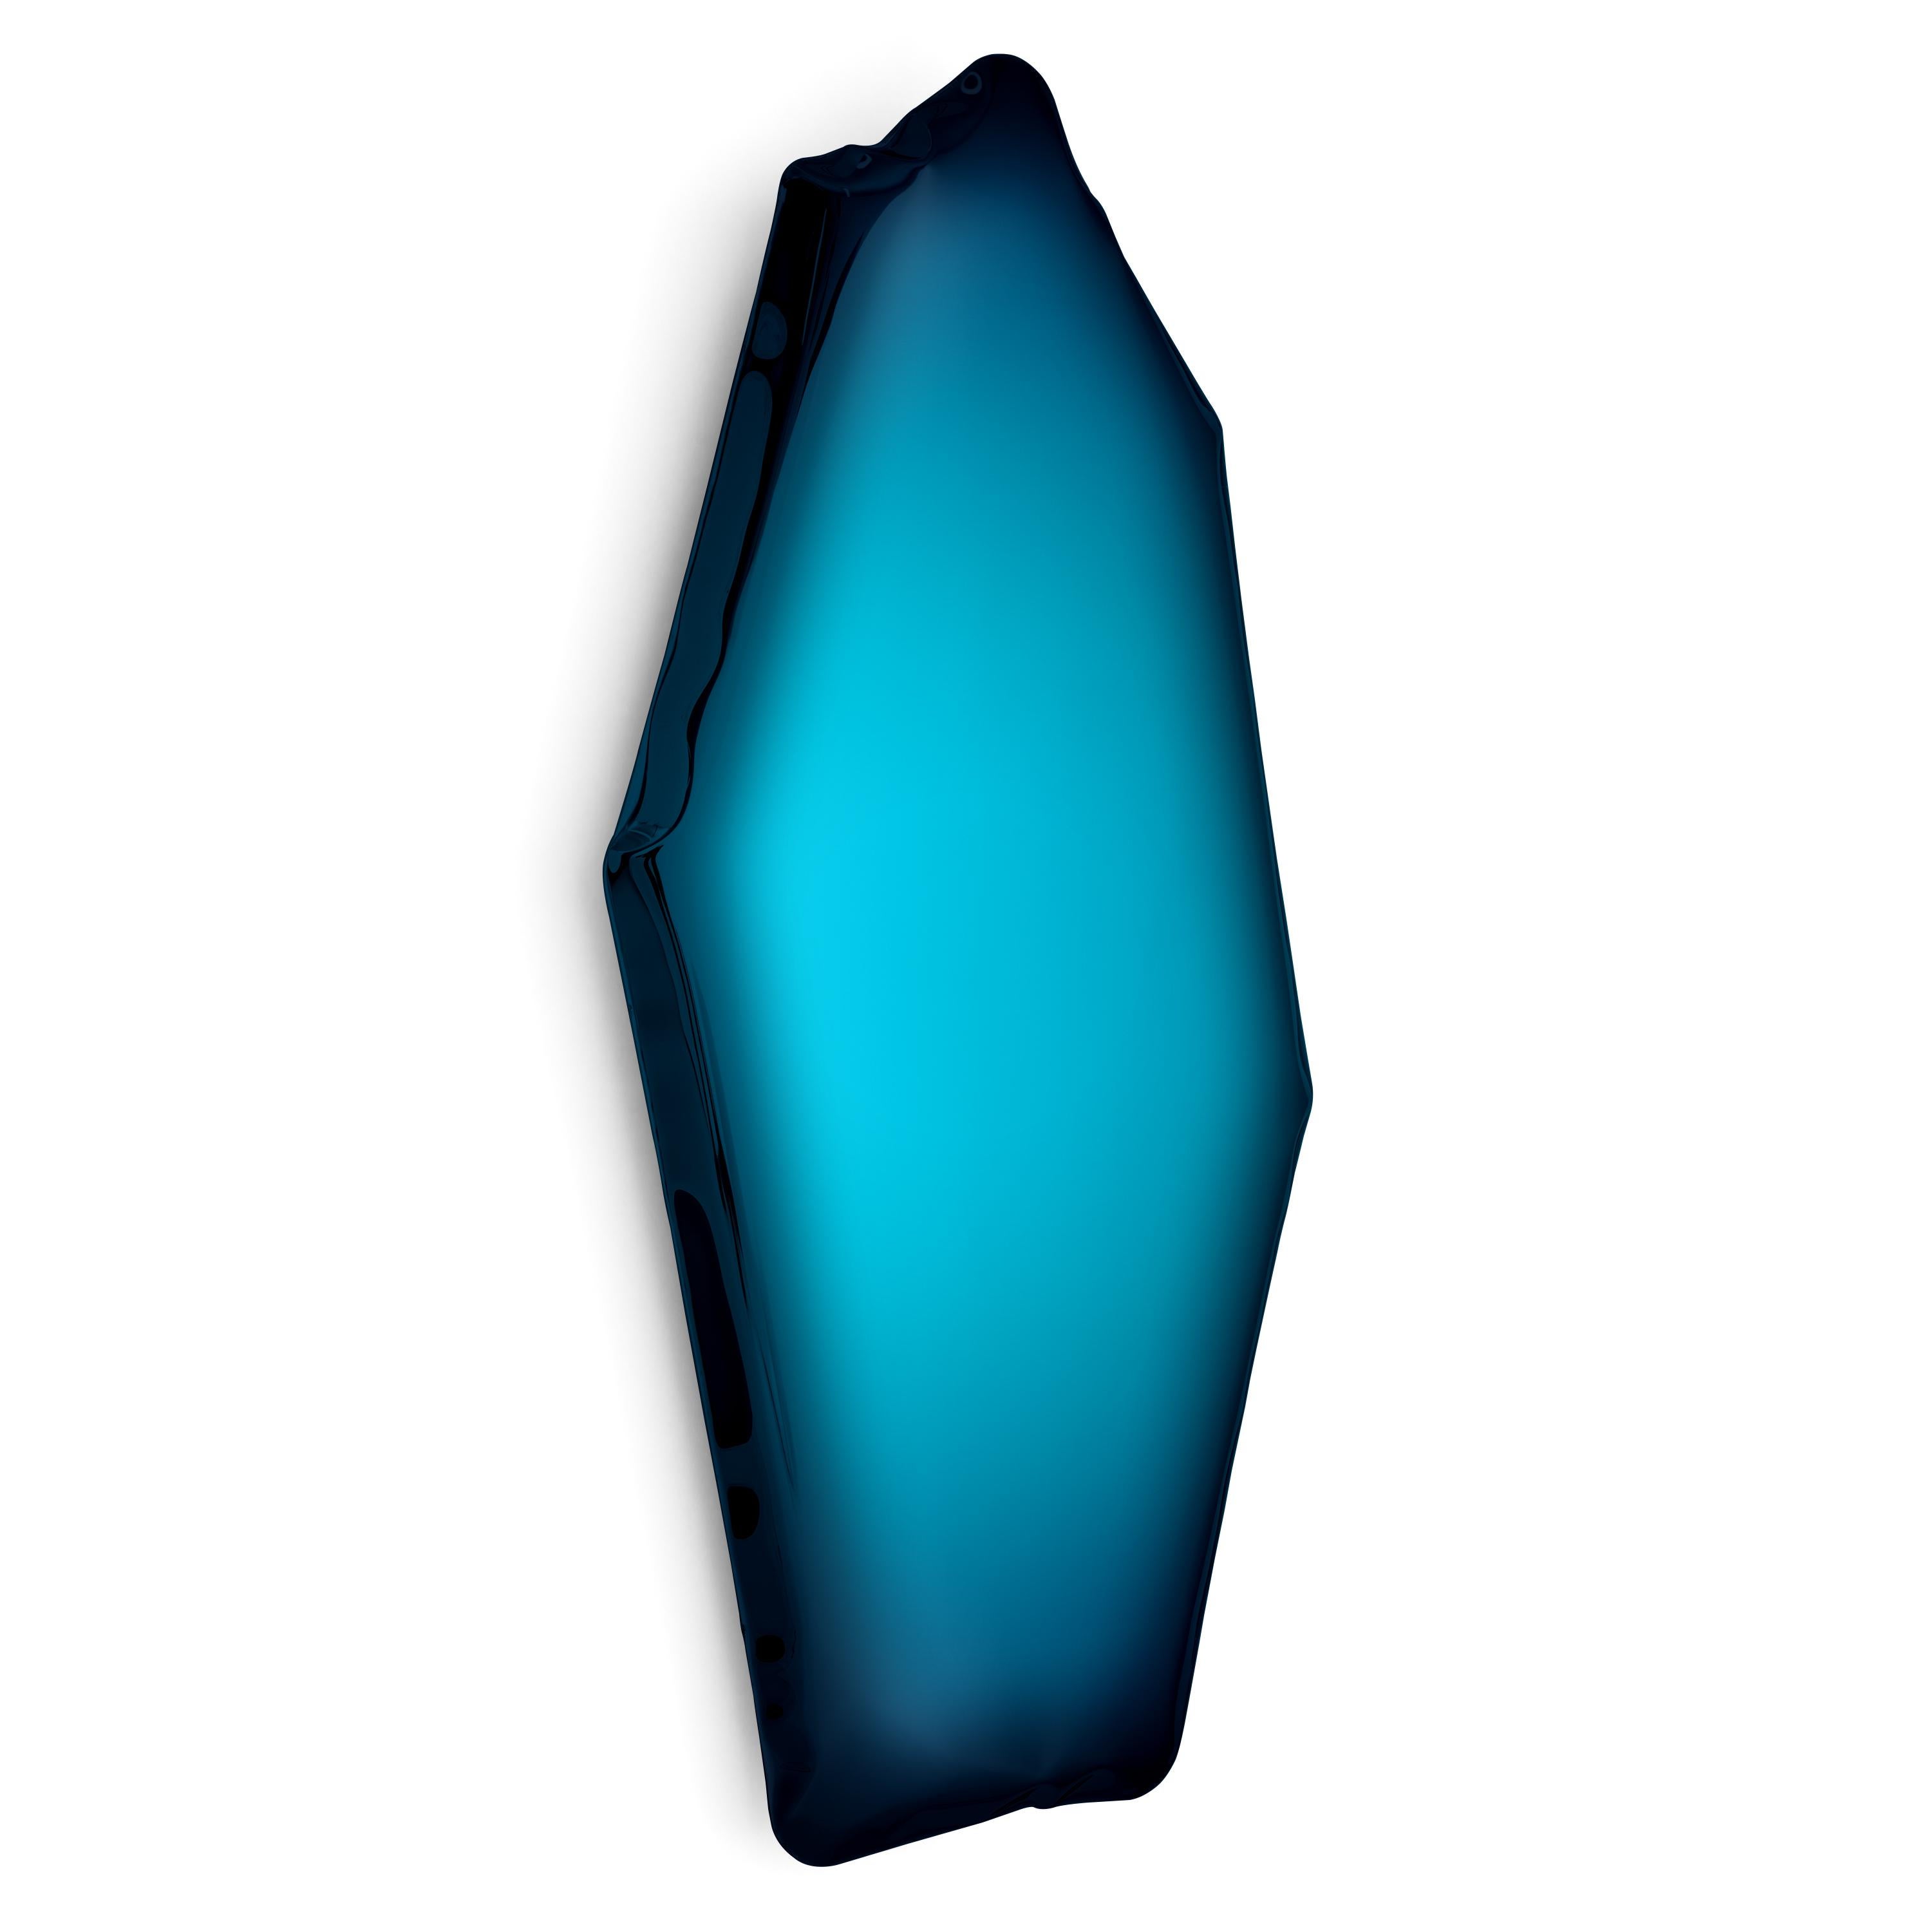 Deep Space Blue C4 Sculptural Wall Mirror by Zieta
Dimensions: D 6 x W 50 x H 100 cm 
Material: Stainless steel. 
Finish: Deep Space Blue.
Available in finishes: Stainless Steel, Deep Space Blue, Emerald, Saphire, Saphire/Emerald, Dark Matter, and